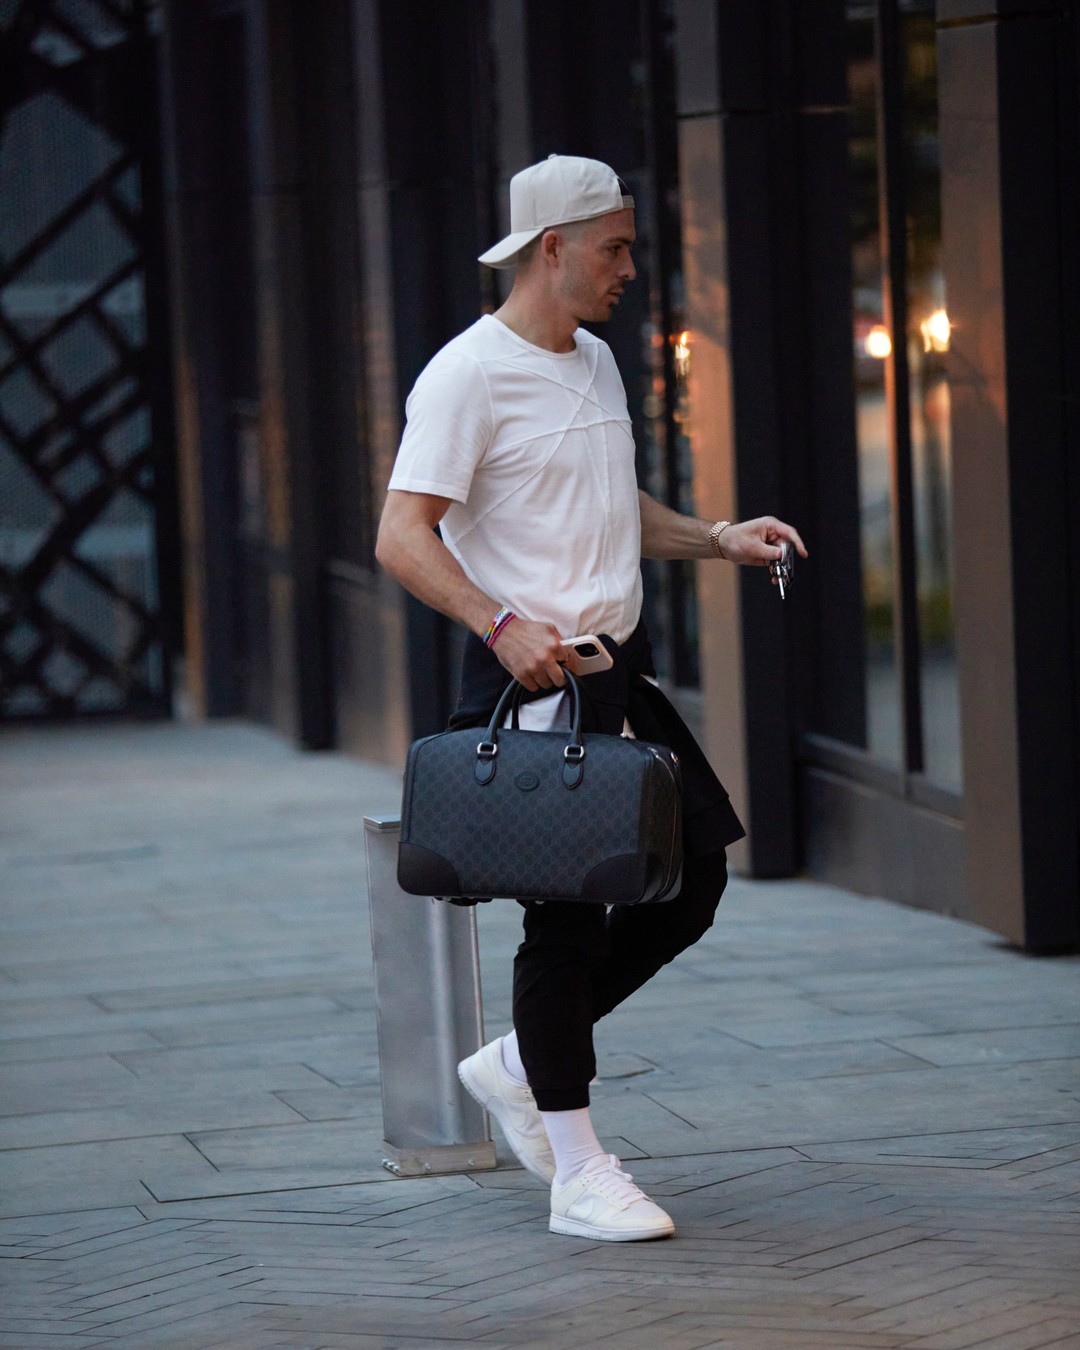 Forget actors, footballers are the new fashion icons